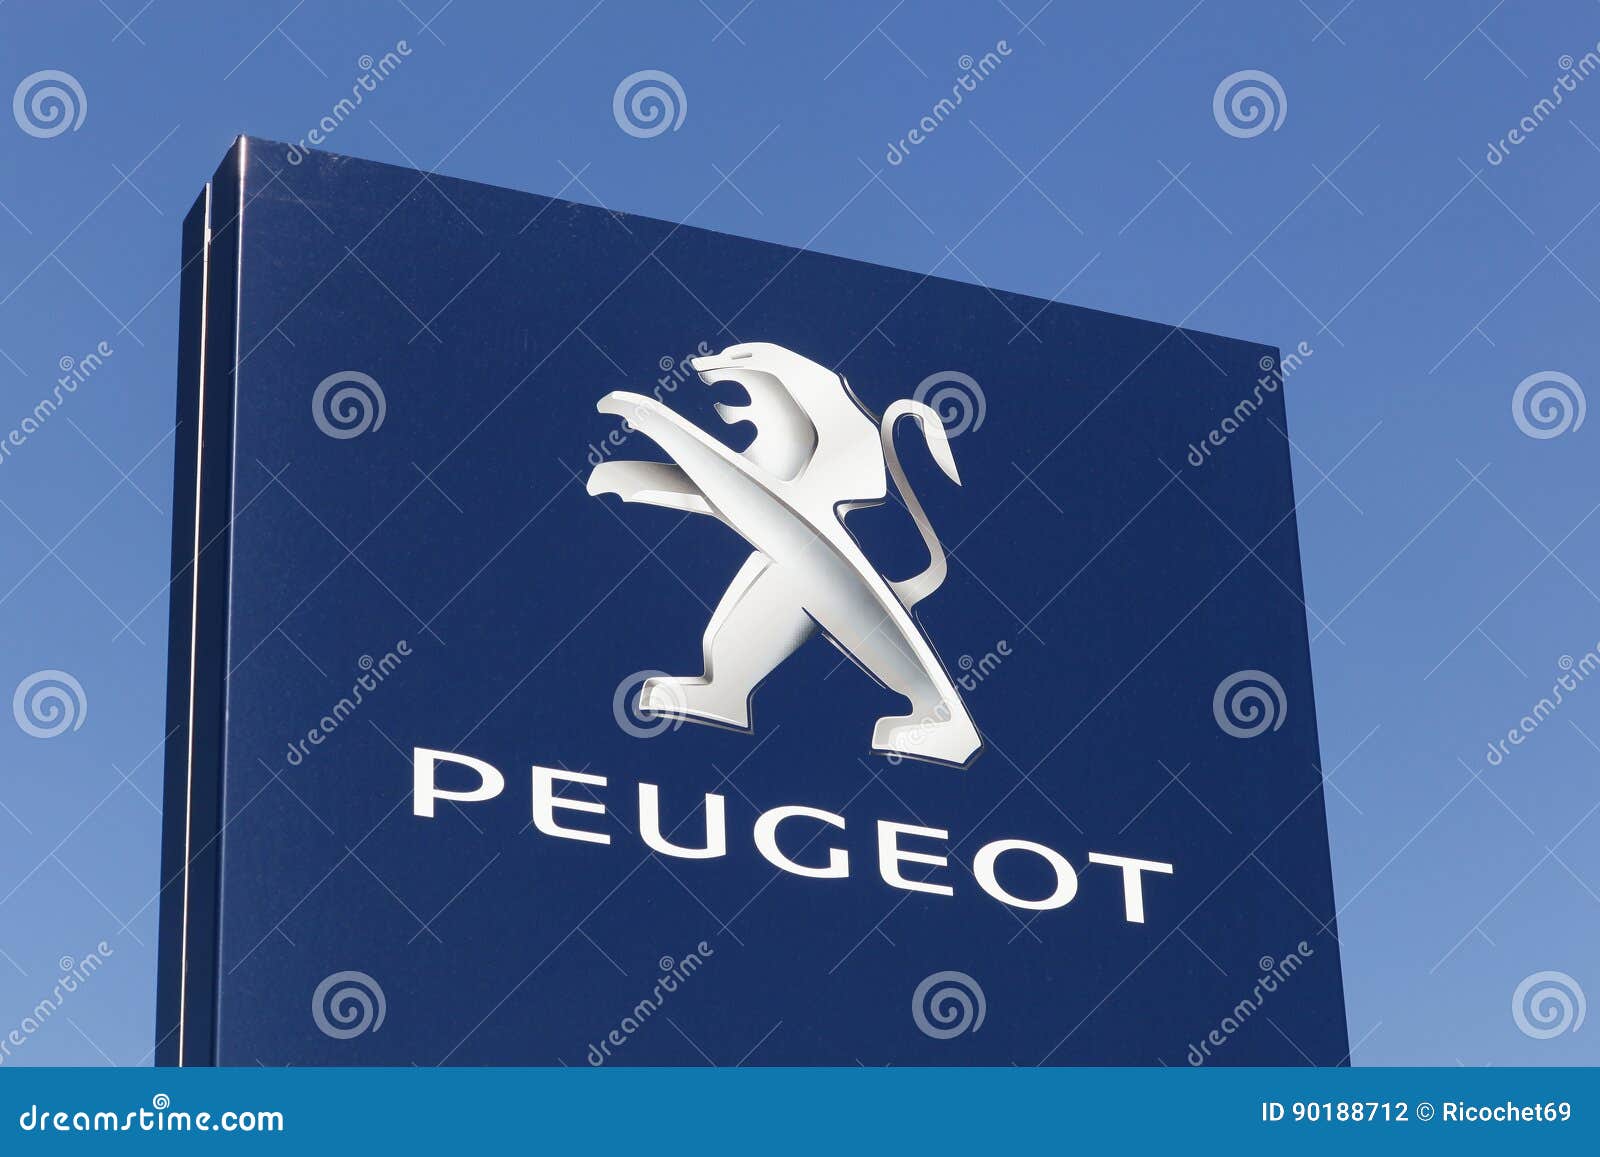 Peugeot Brand Logo Symbol With Name Blue Design French Car